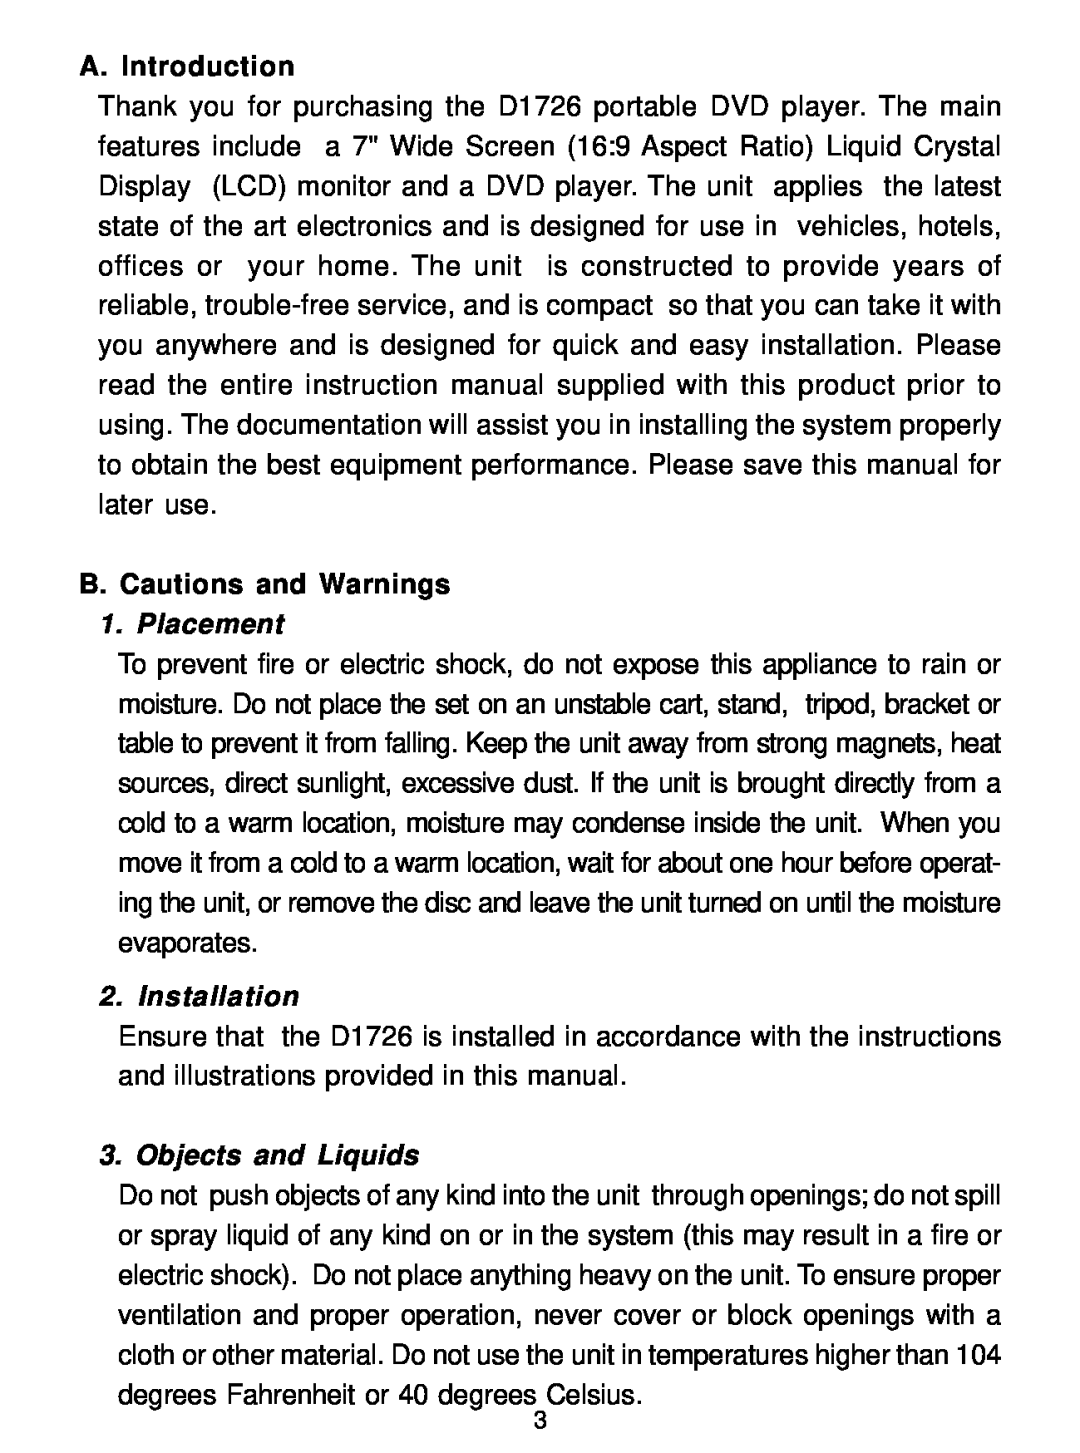 Audiovox D1726 manual A. Introduction, B. Cautions and Warnings, Placement, Installation, Objects and Liquids 